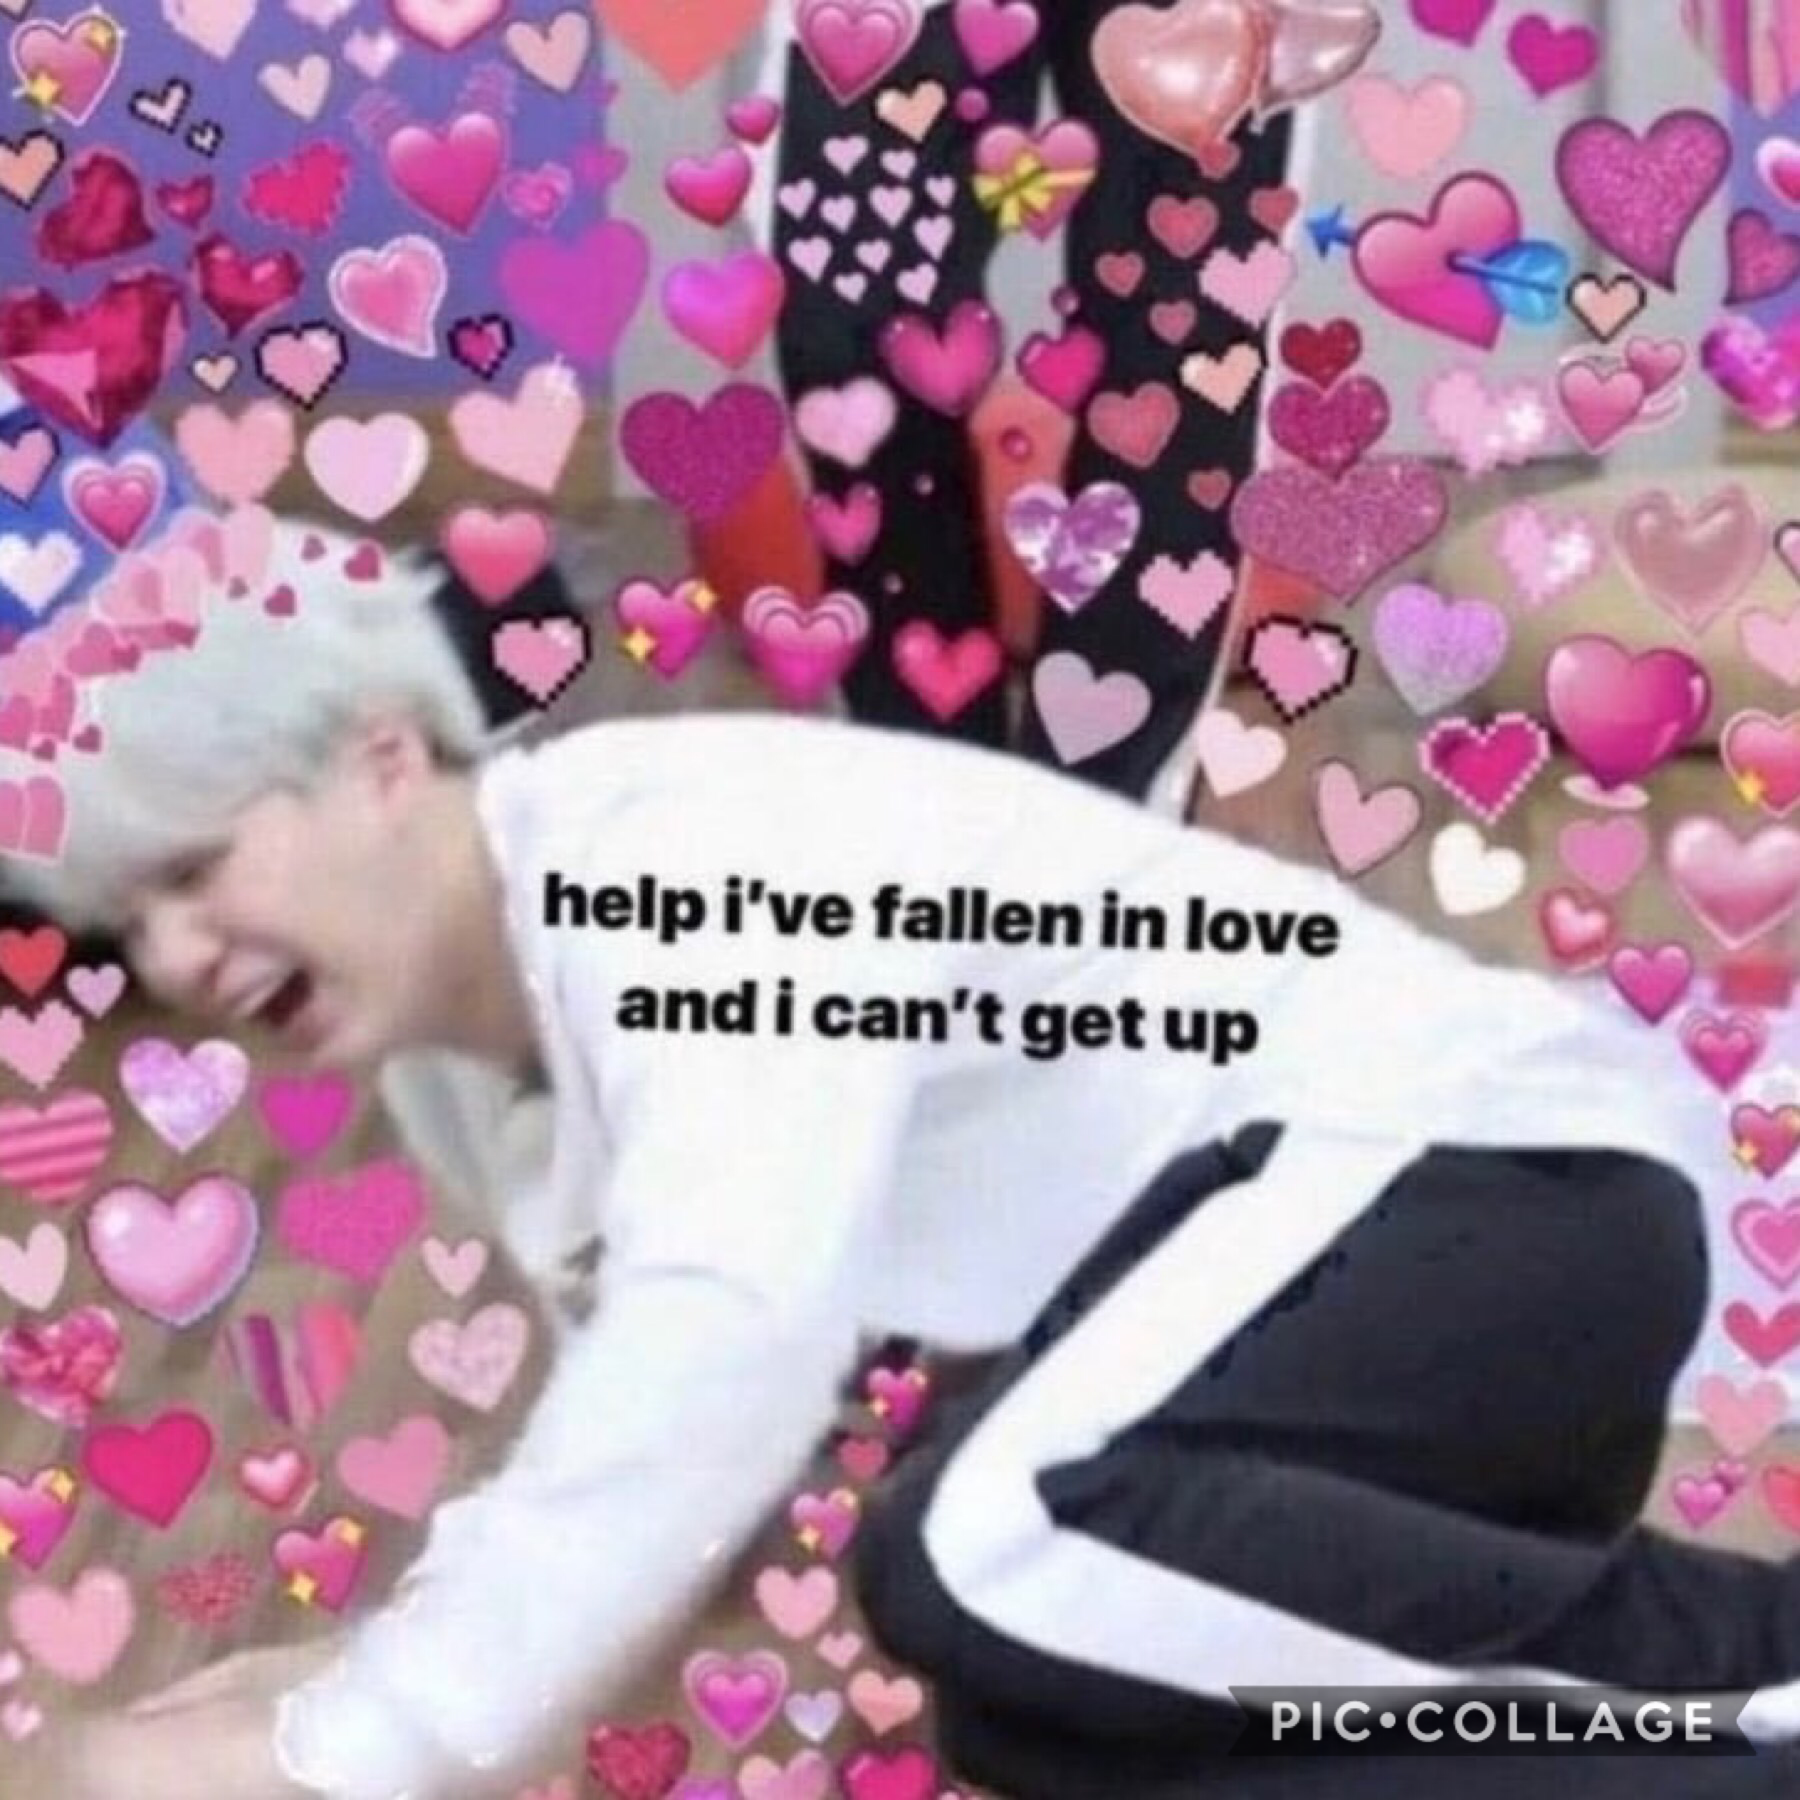 ☙𝐩𝐞𝐚𝐜𝐡𝐞𝐬 𝐚𝐧𝐝 𝐜𝐫𝐞𝐚𝐦☙
= =

you all are such beautiful and lovely humans 

please take care of yourselves and be happy 